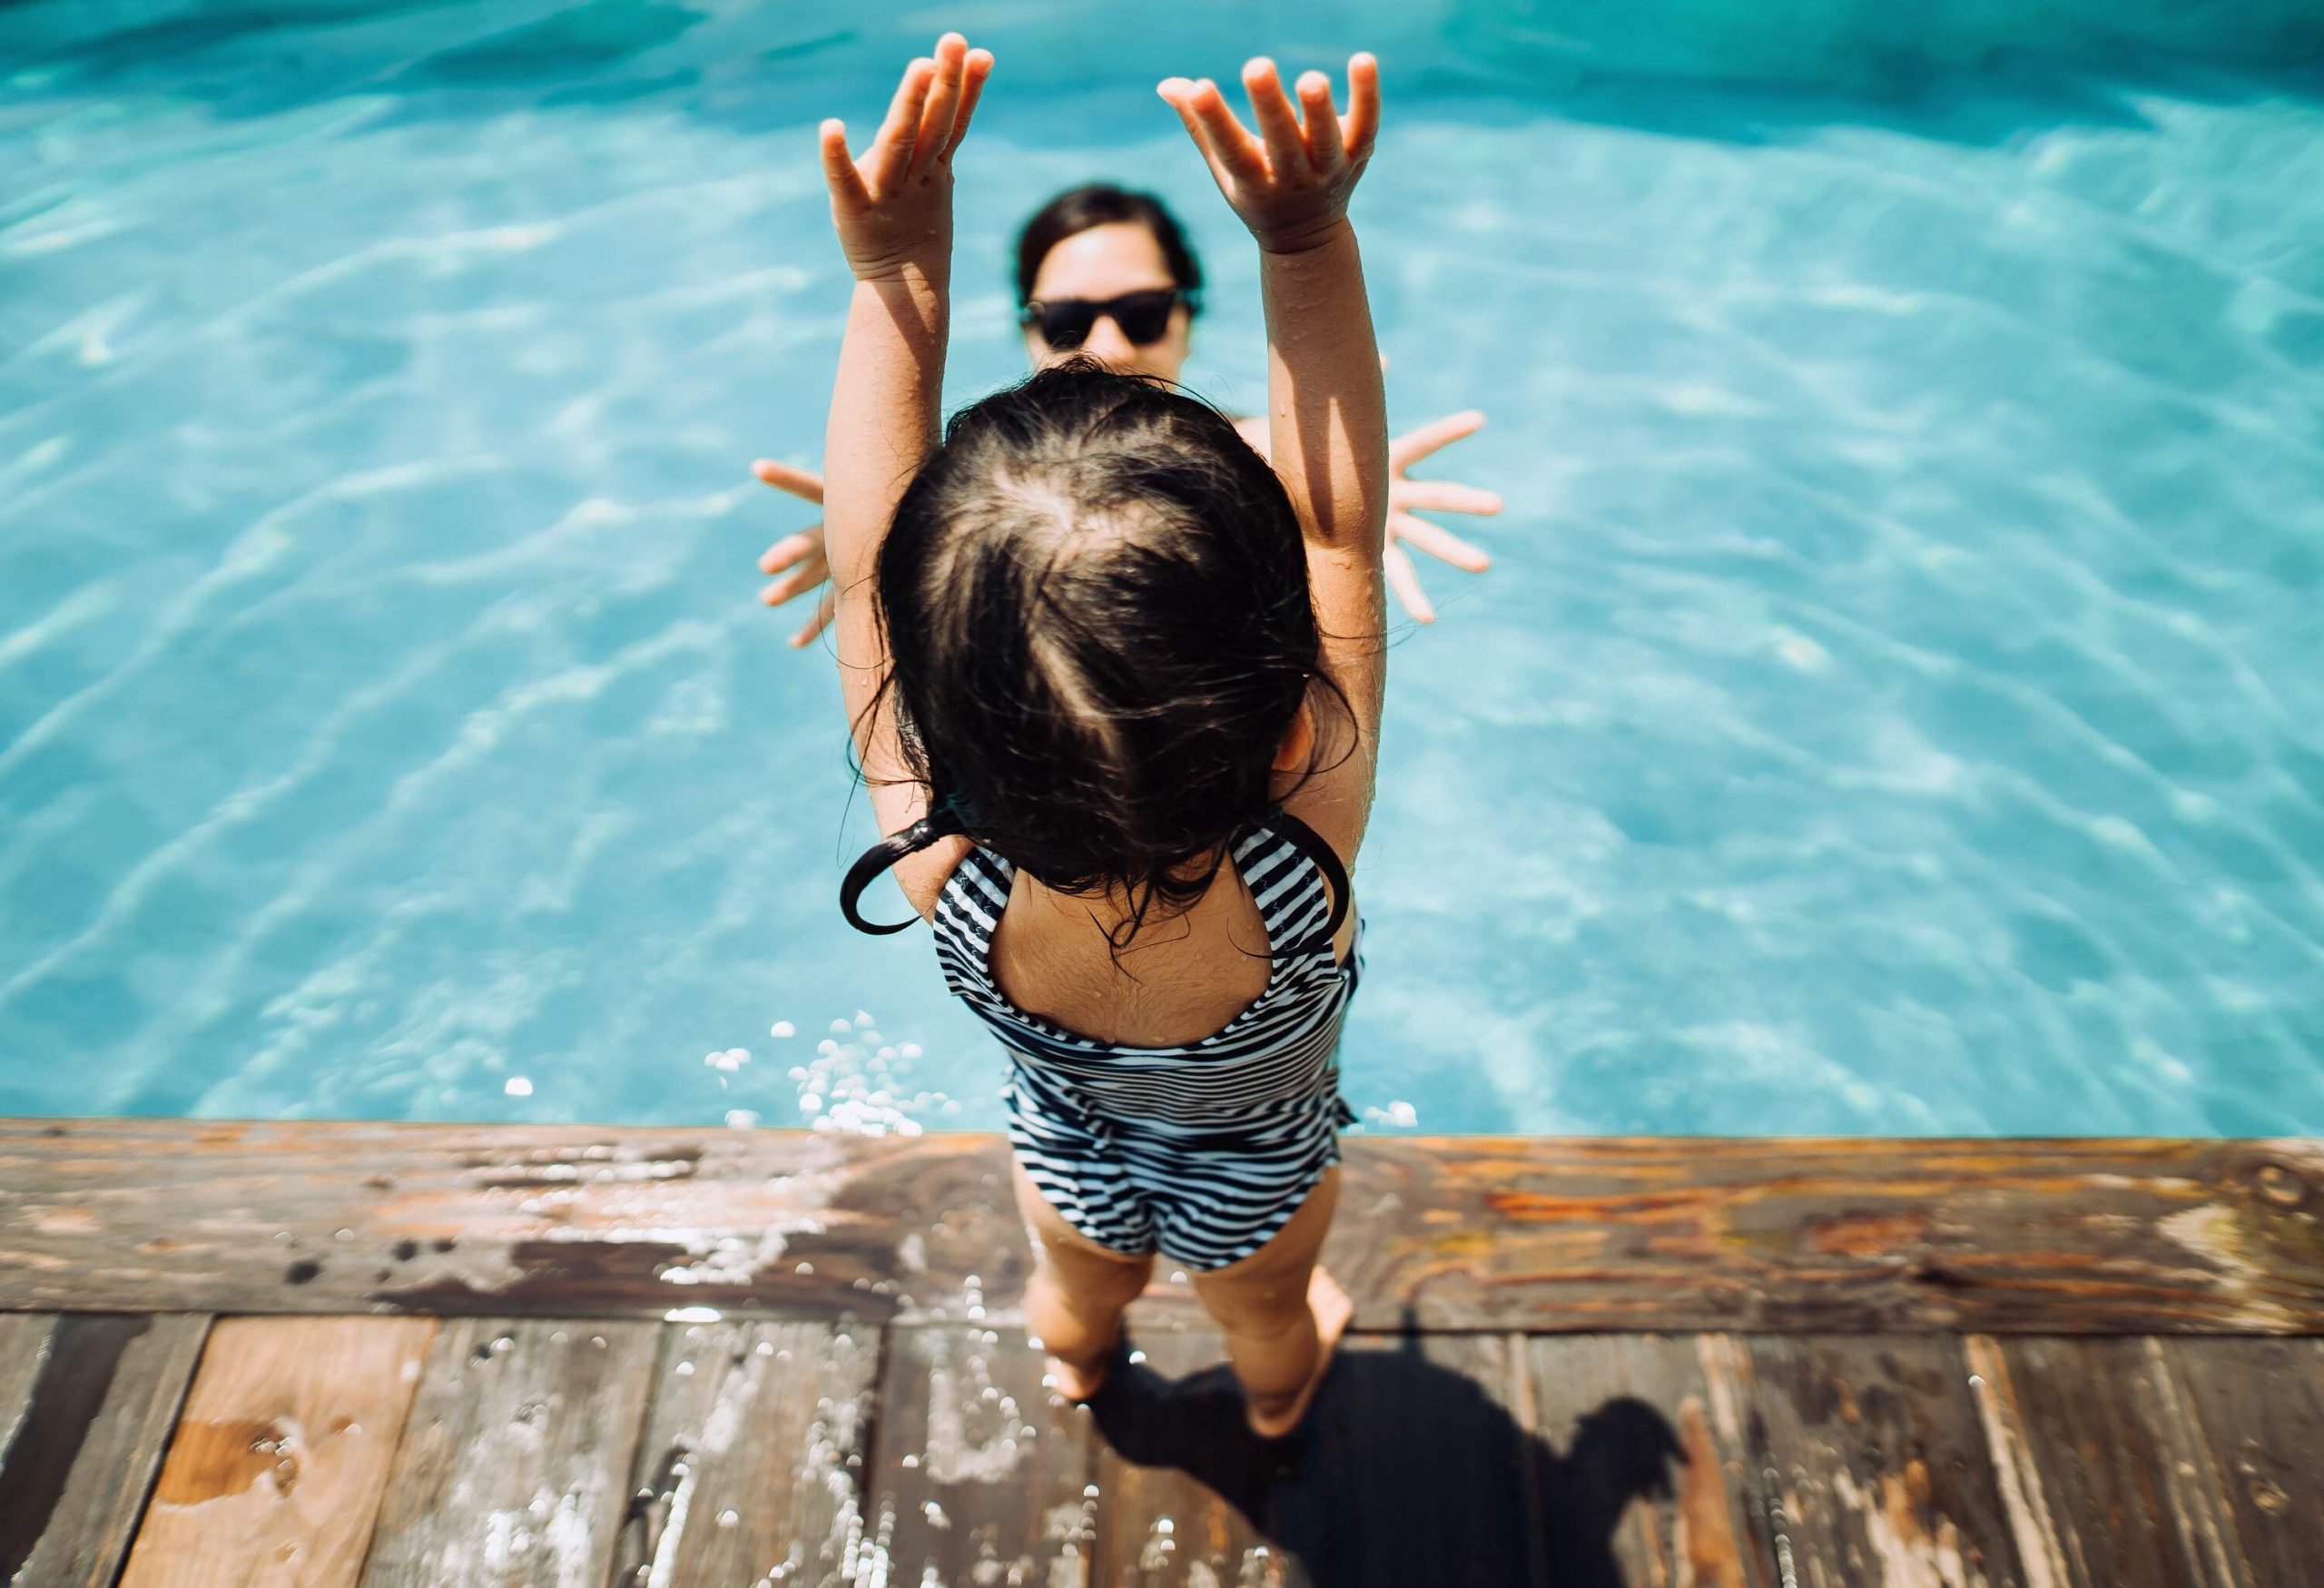 An excited toddler girl stands poolside with her arms raised as she watches her mother in the water.